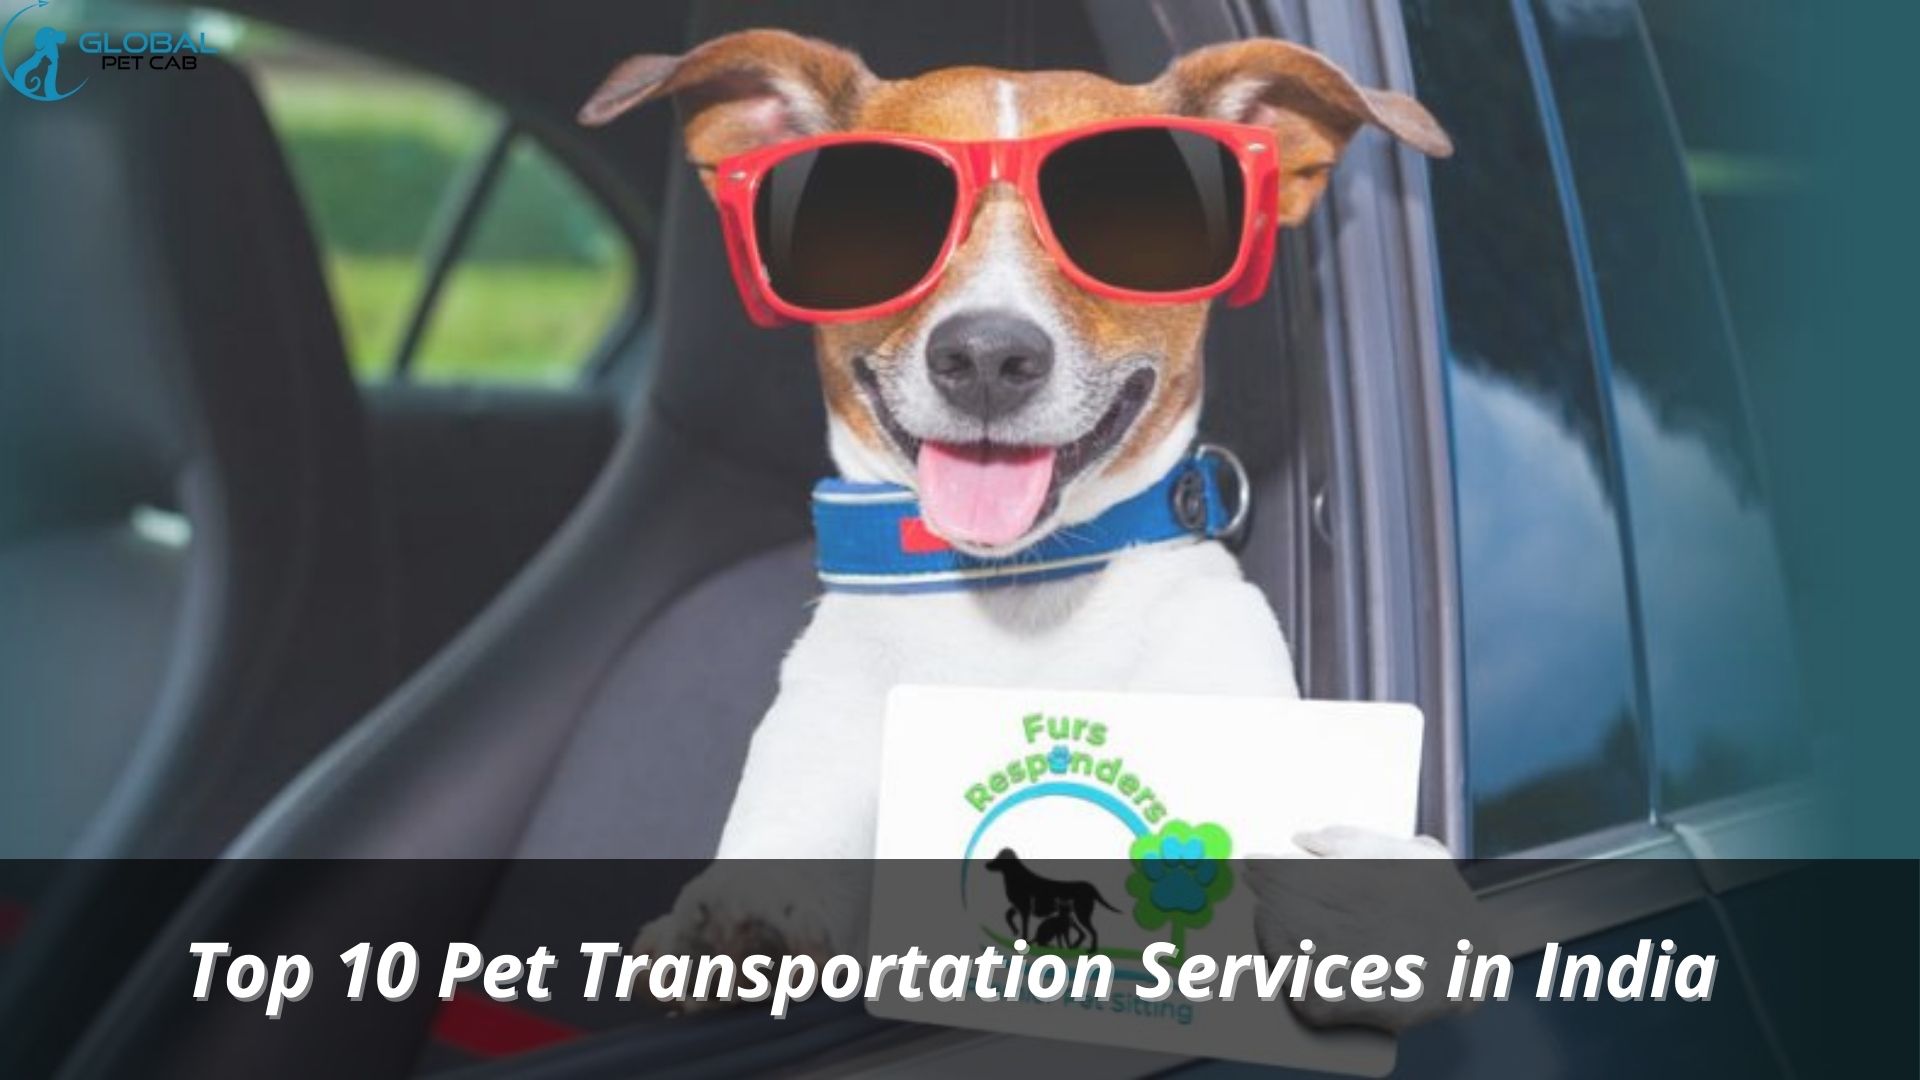 Top 10 Pet Transportation Services in India | Global Pet Cab